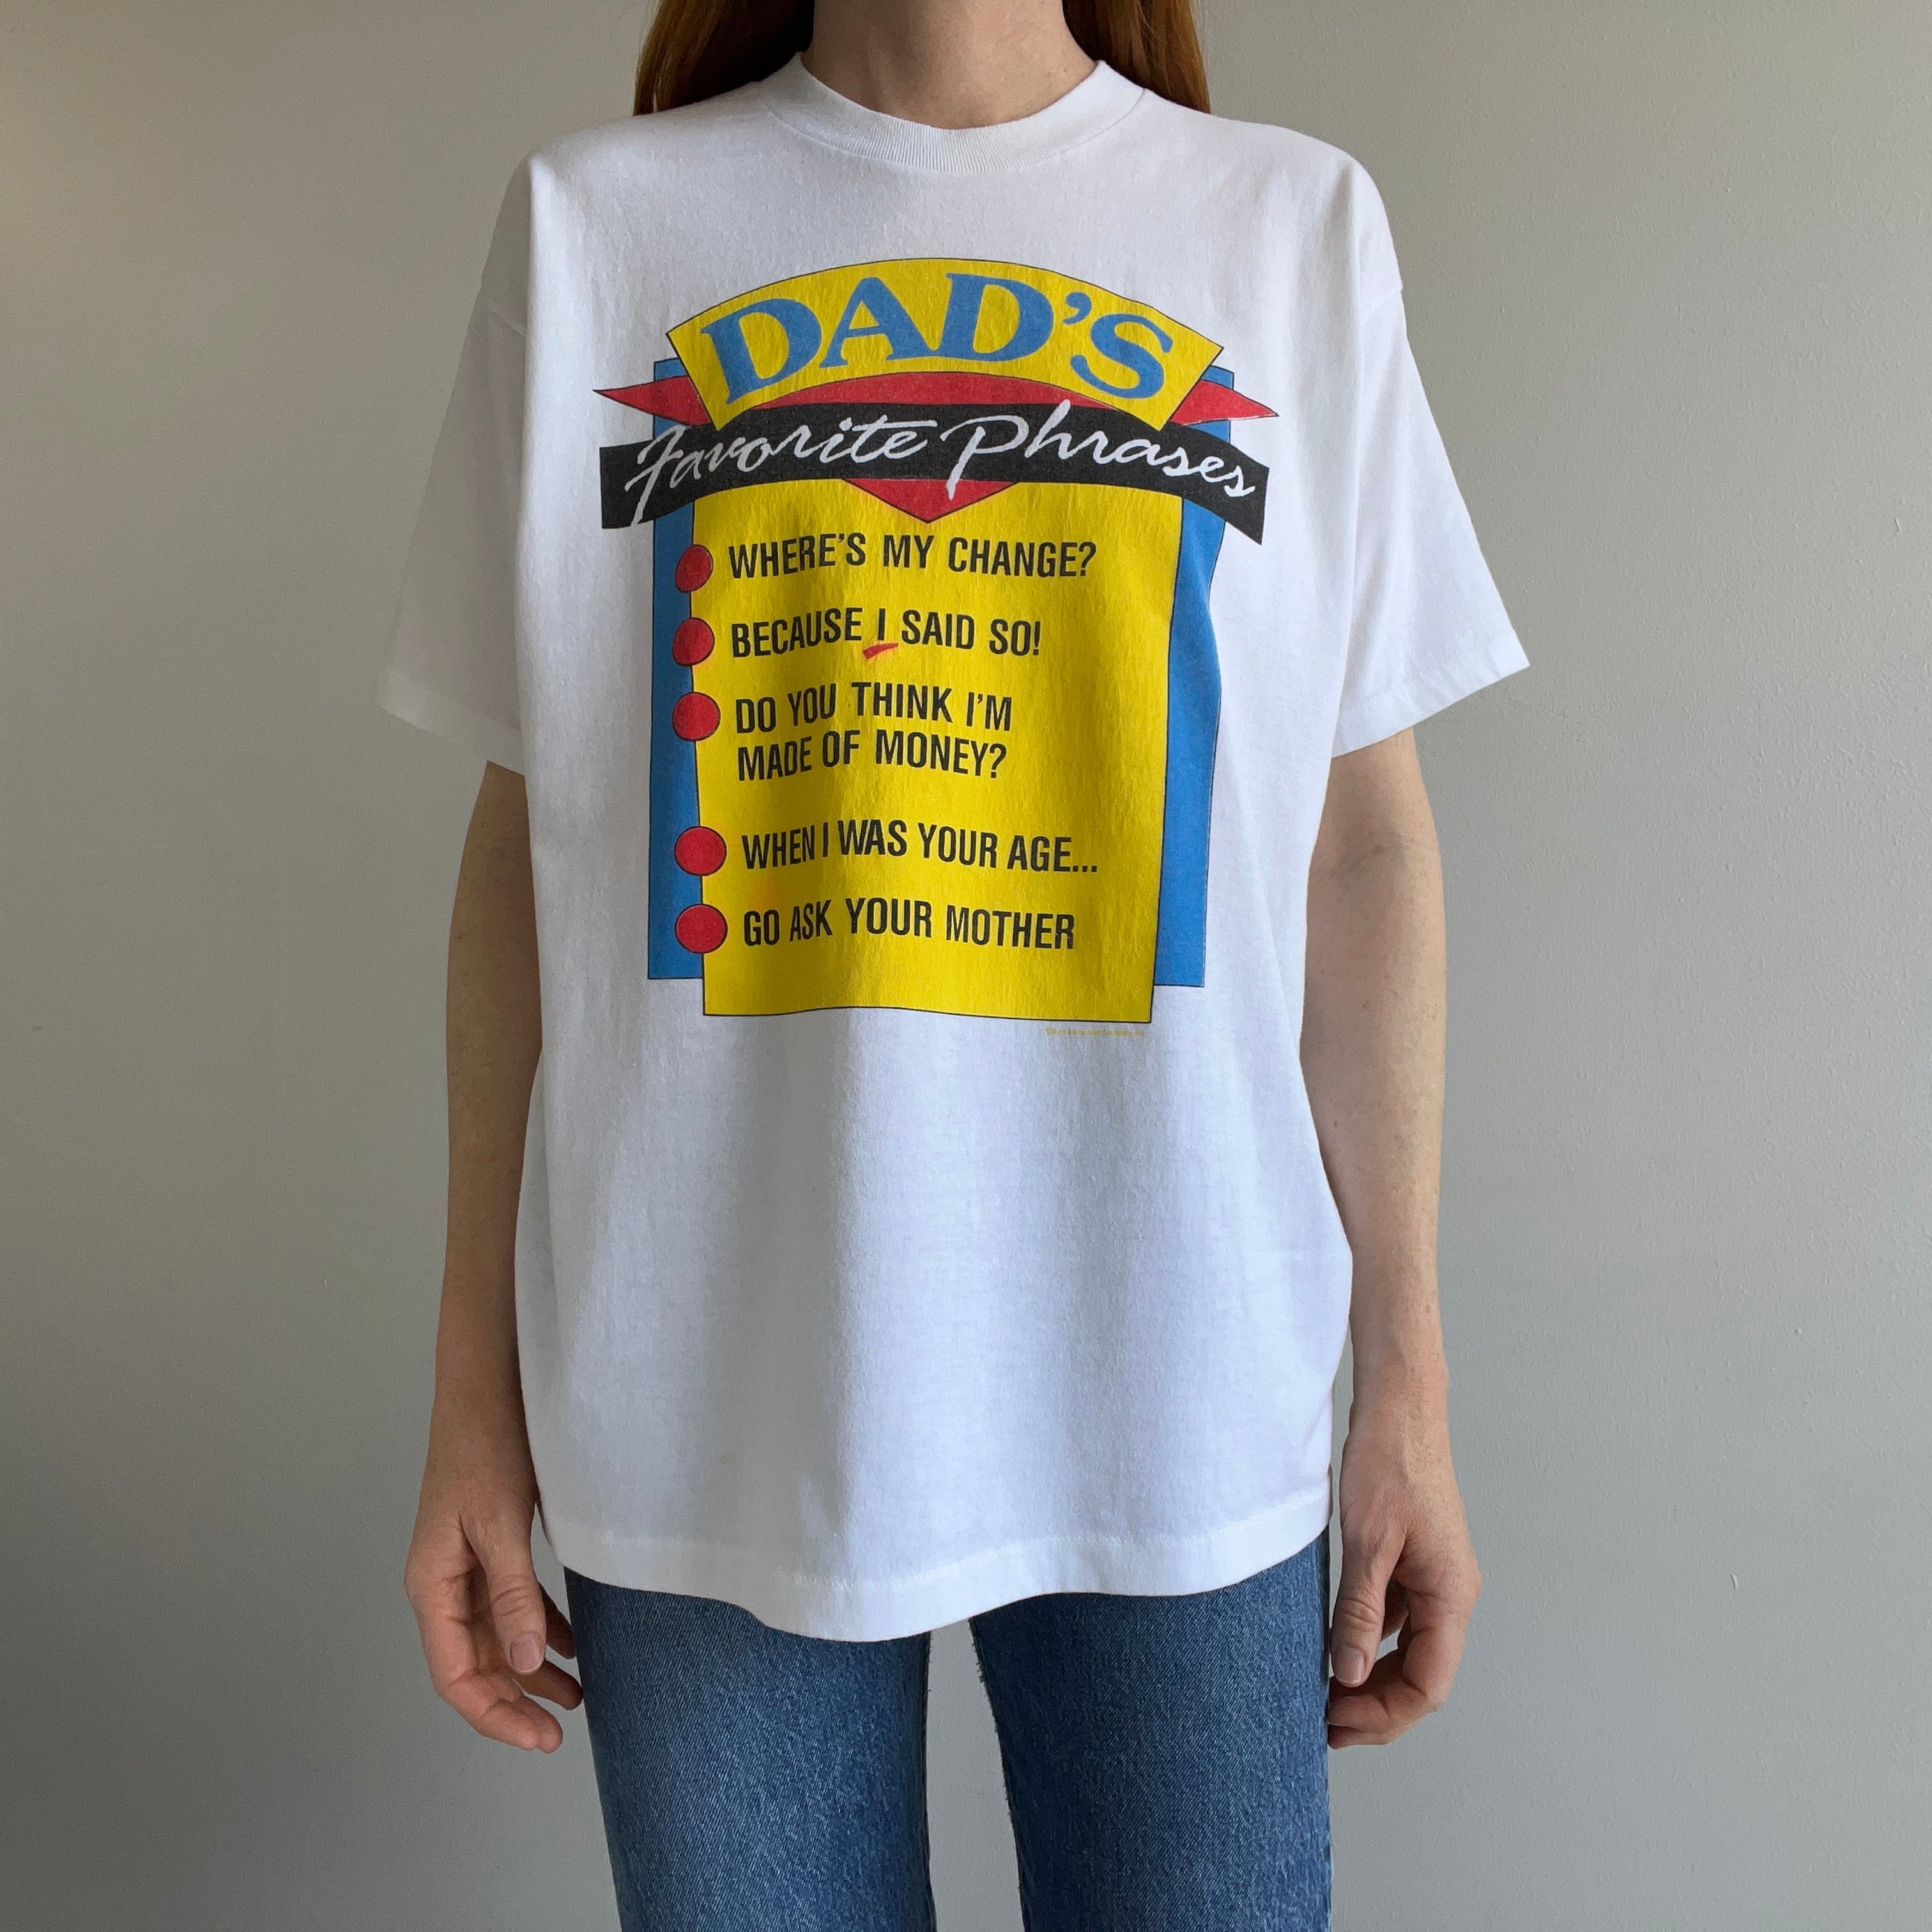 1980/90s Dad's Favorite Phrases T-Shirt